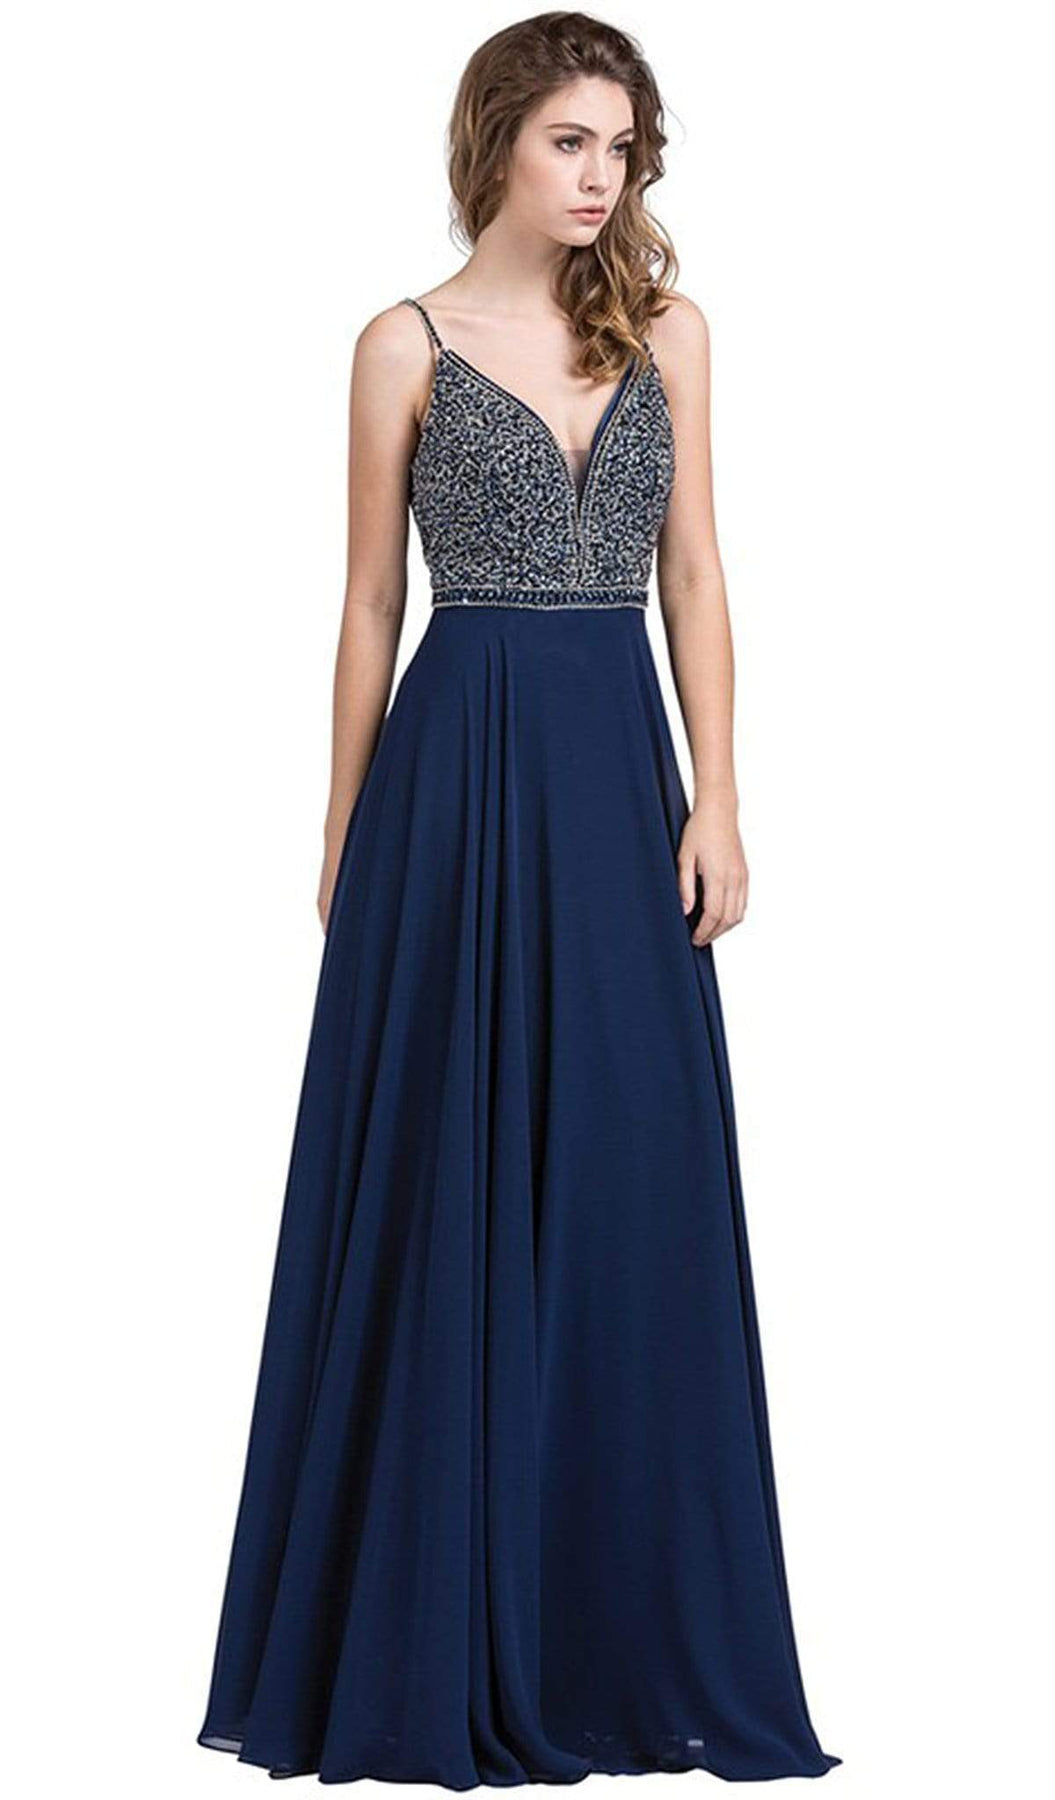 Dancing Queen - 2493 Jewel Beaded A-Line Chiffon Gown Prom Dresses XS / Navy